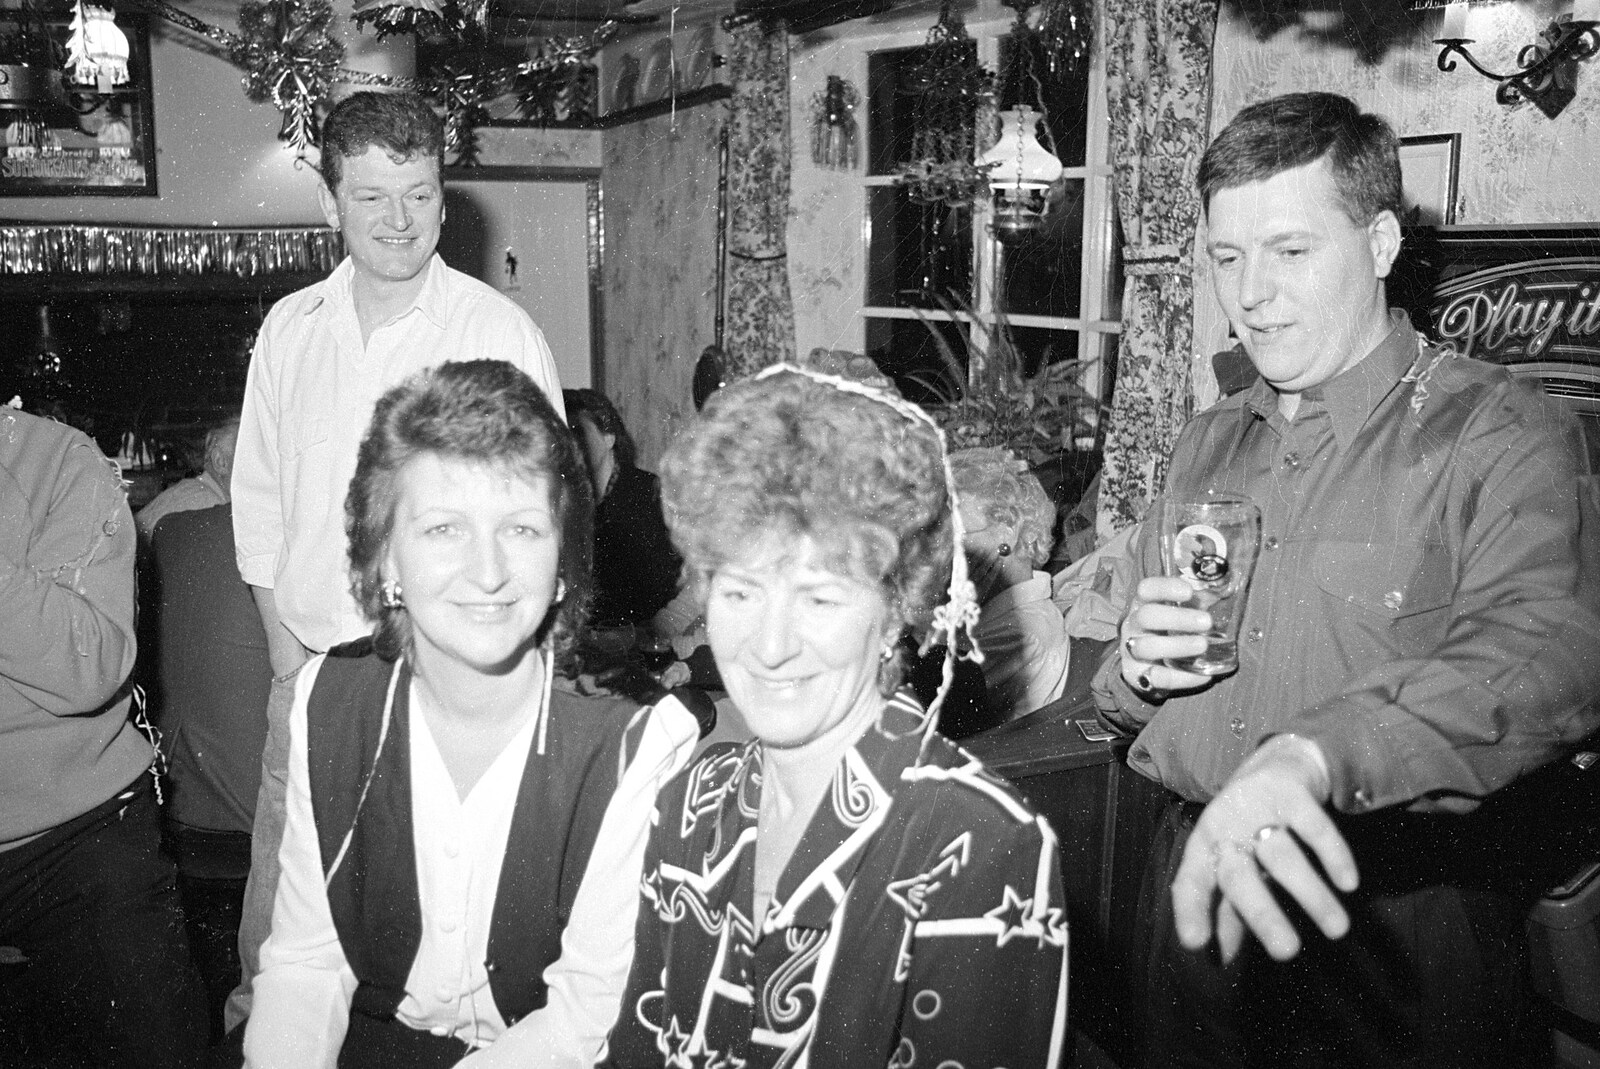 Janet's got string on her head from New Year's Eve at the Swan Inn, Brome, Suffolk - 31st December 1992